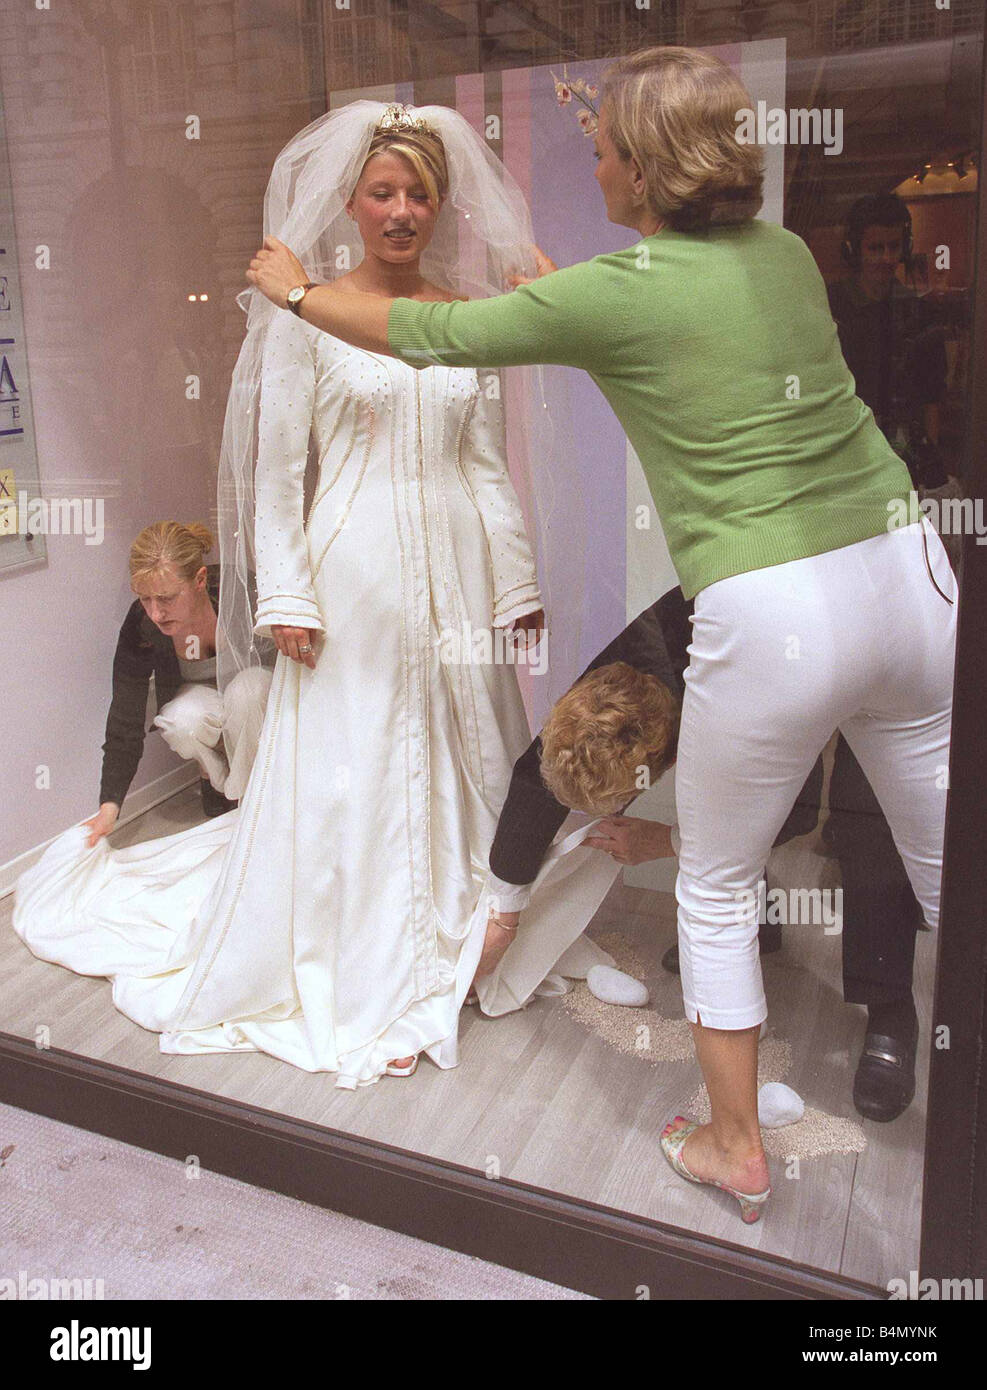 Berkertex Brides Shop June 1999 Maranne Crick Fashion Student standing in shop window wearing Replica of Royal Wedding Dress put together by Helen Marina Designer at Berkertex Brides Shop challenge commissioned by BBC Watchdog Programme being helped with final preparations by Alice Beer TV Presenter Stock Photo